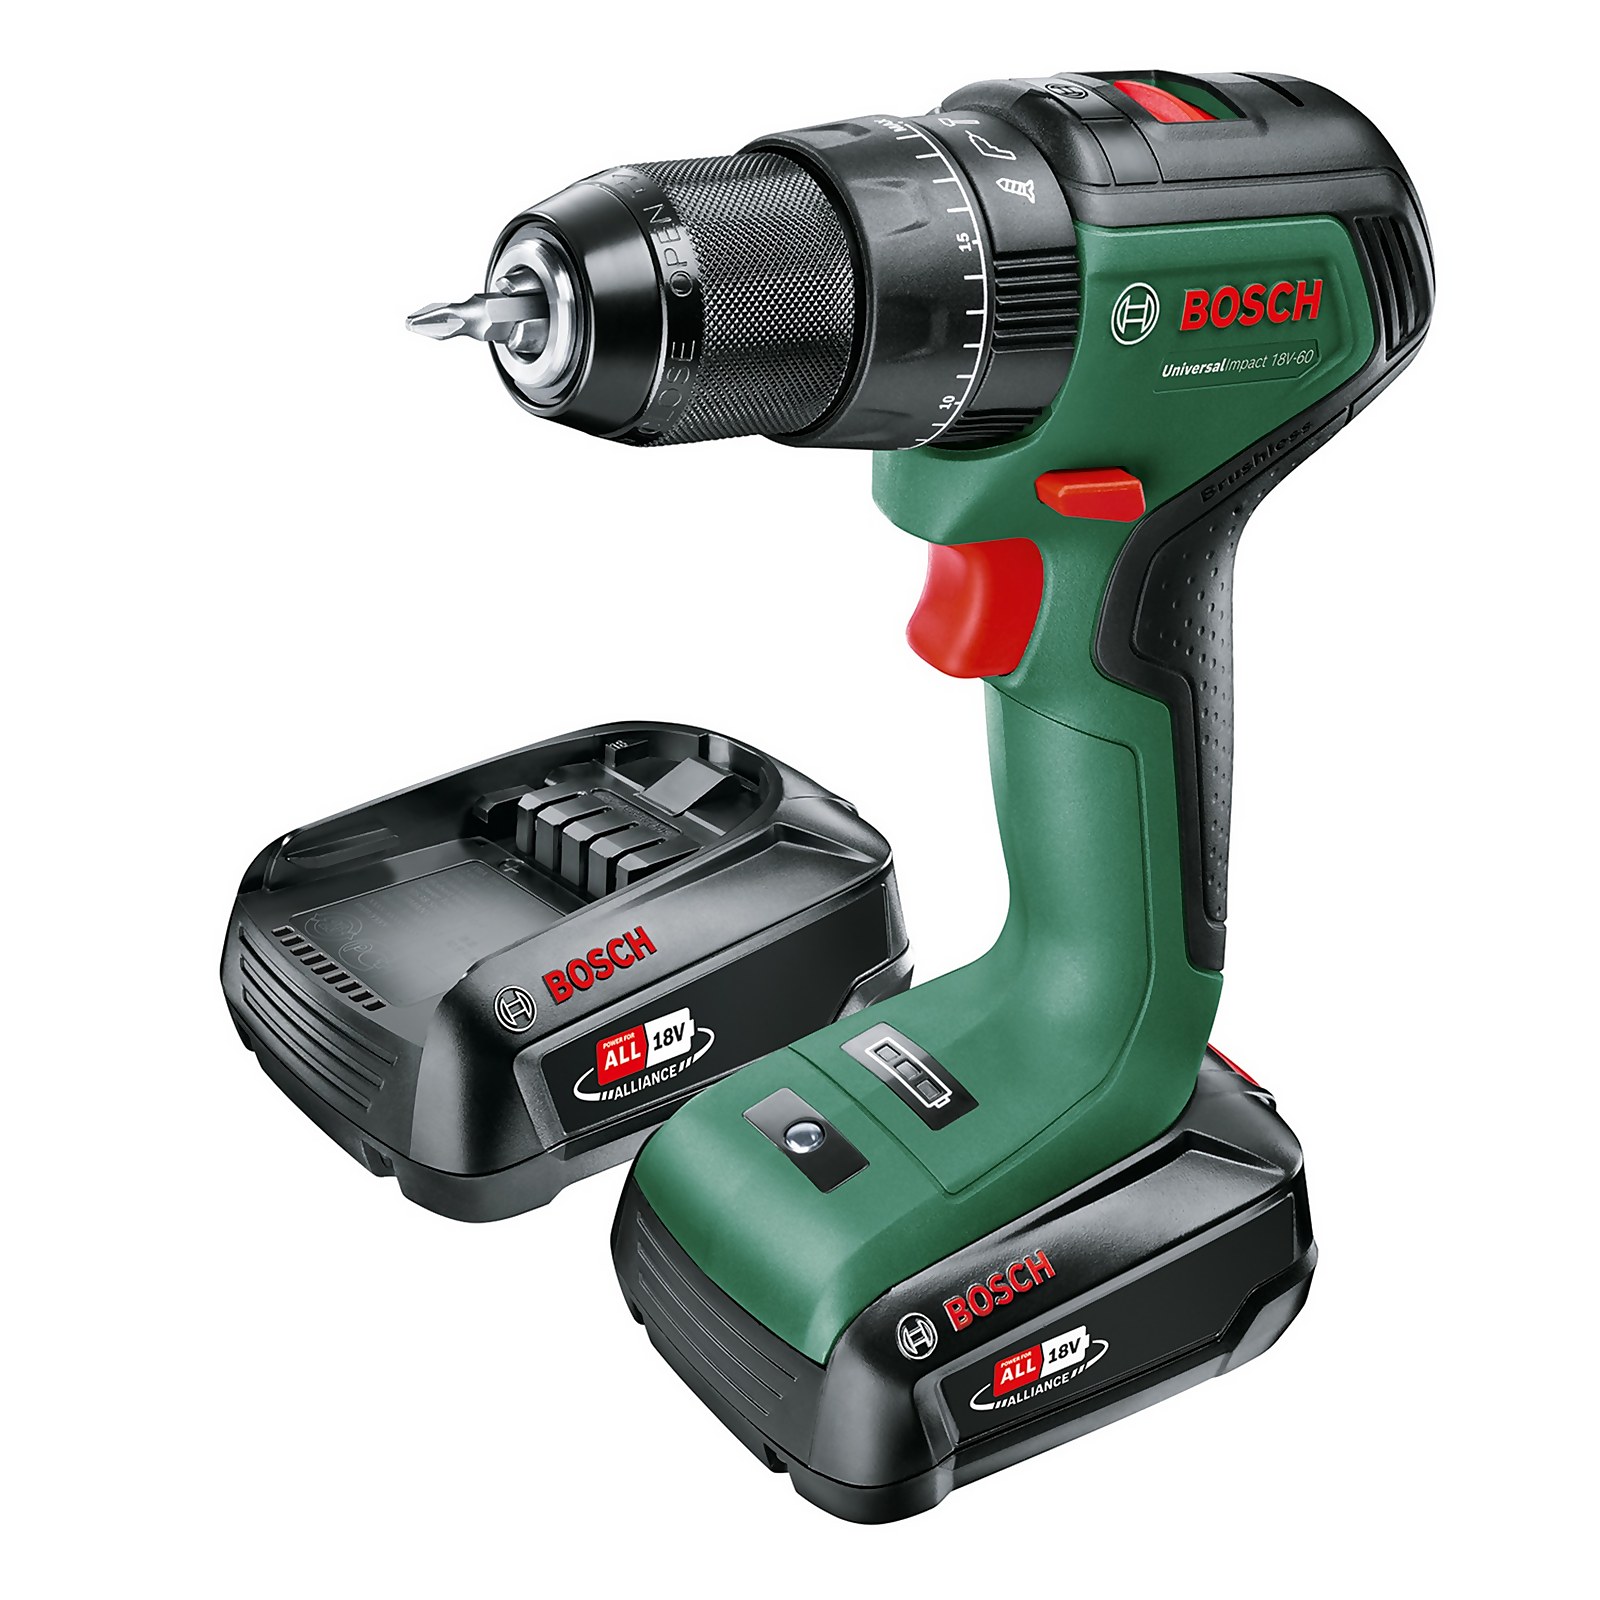 Photo of Bosch Universalimpact 18v-60 With 2 X 2ah Batteries & Al18v 20 Charger